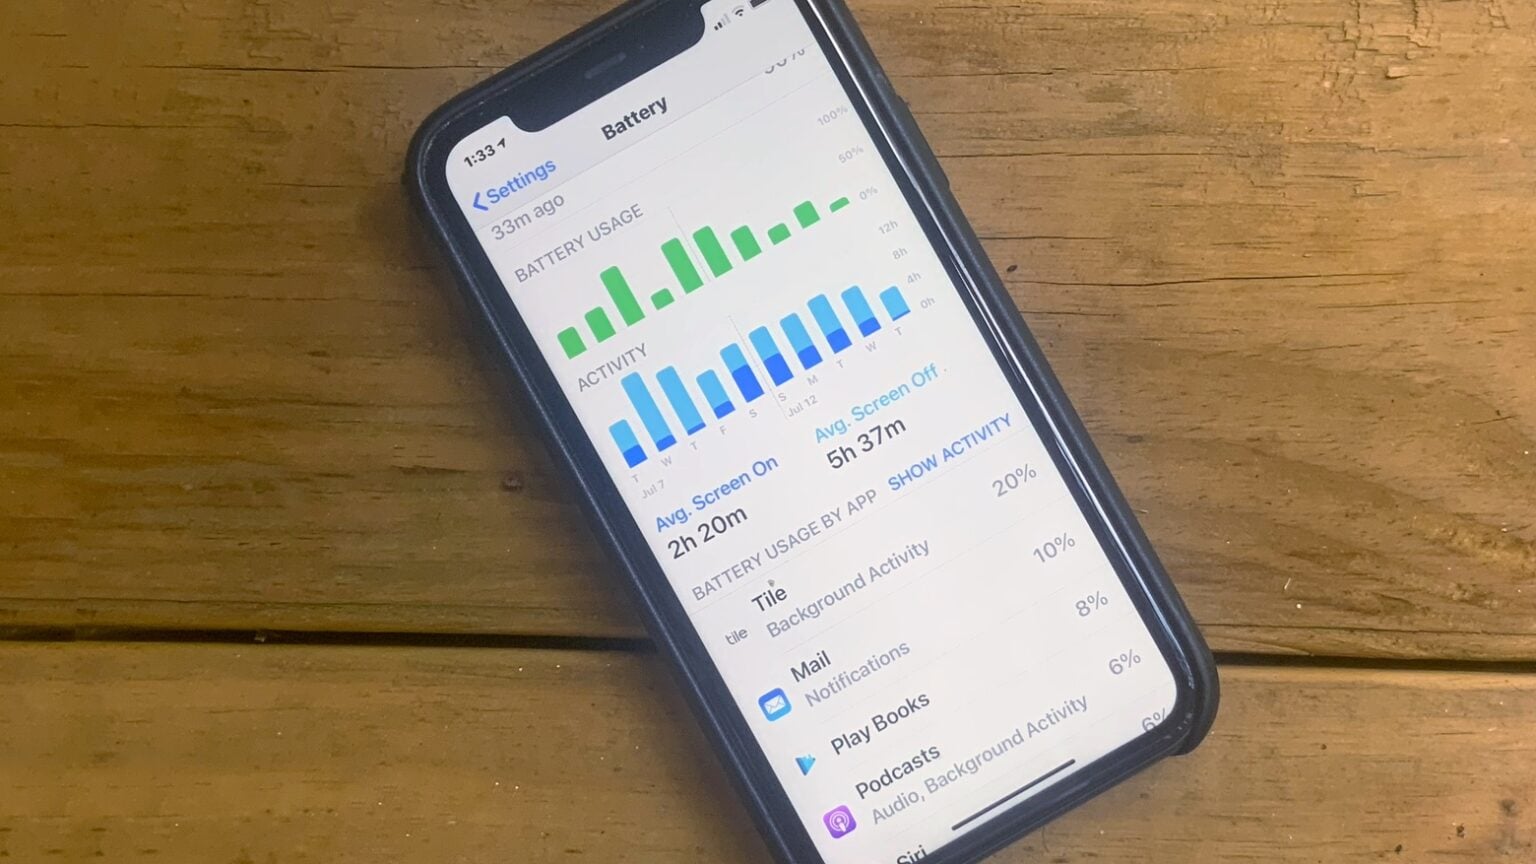 iOS 13 battery life eroded. But iOS 14 offers better.